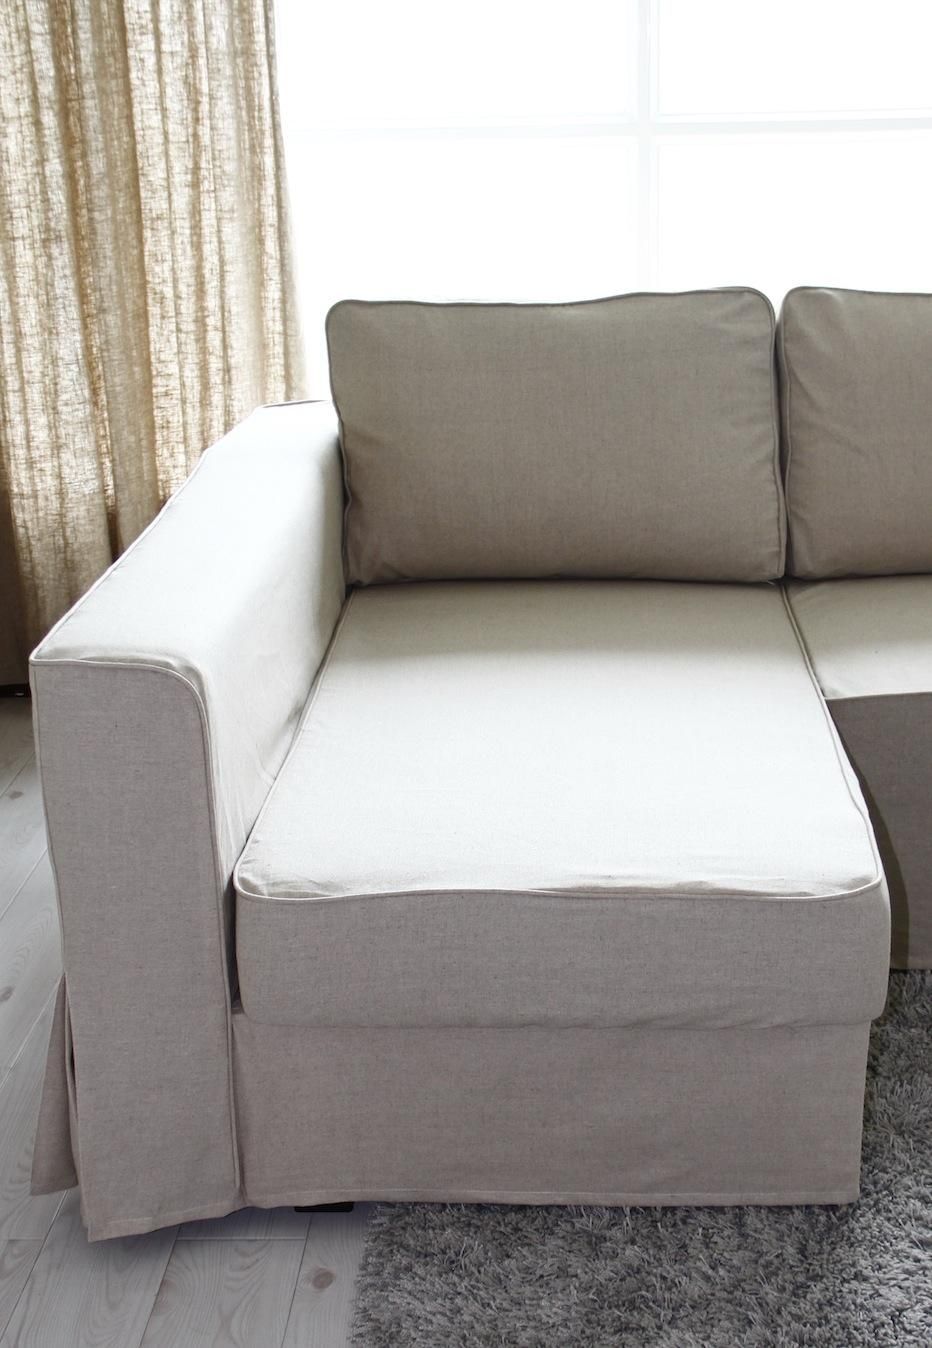 Loose Fit Linen Manstad Sofa Slipcovers Now Available In Manstad Sofa Bed (View 20 of 20)